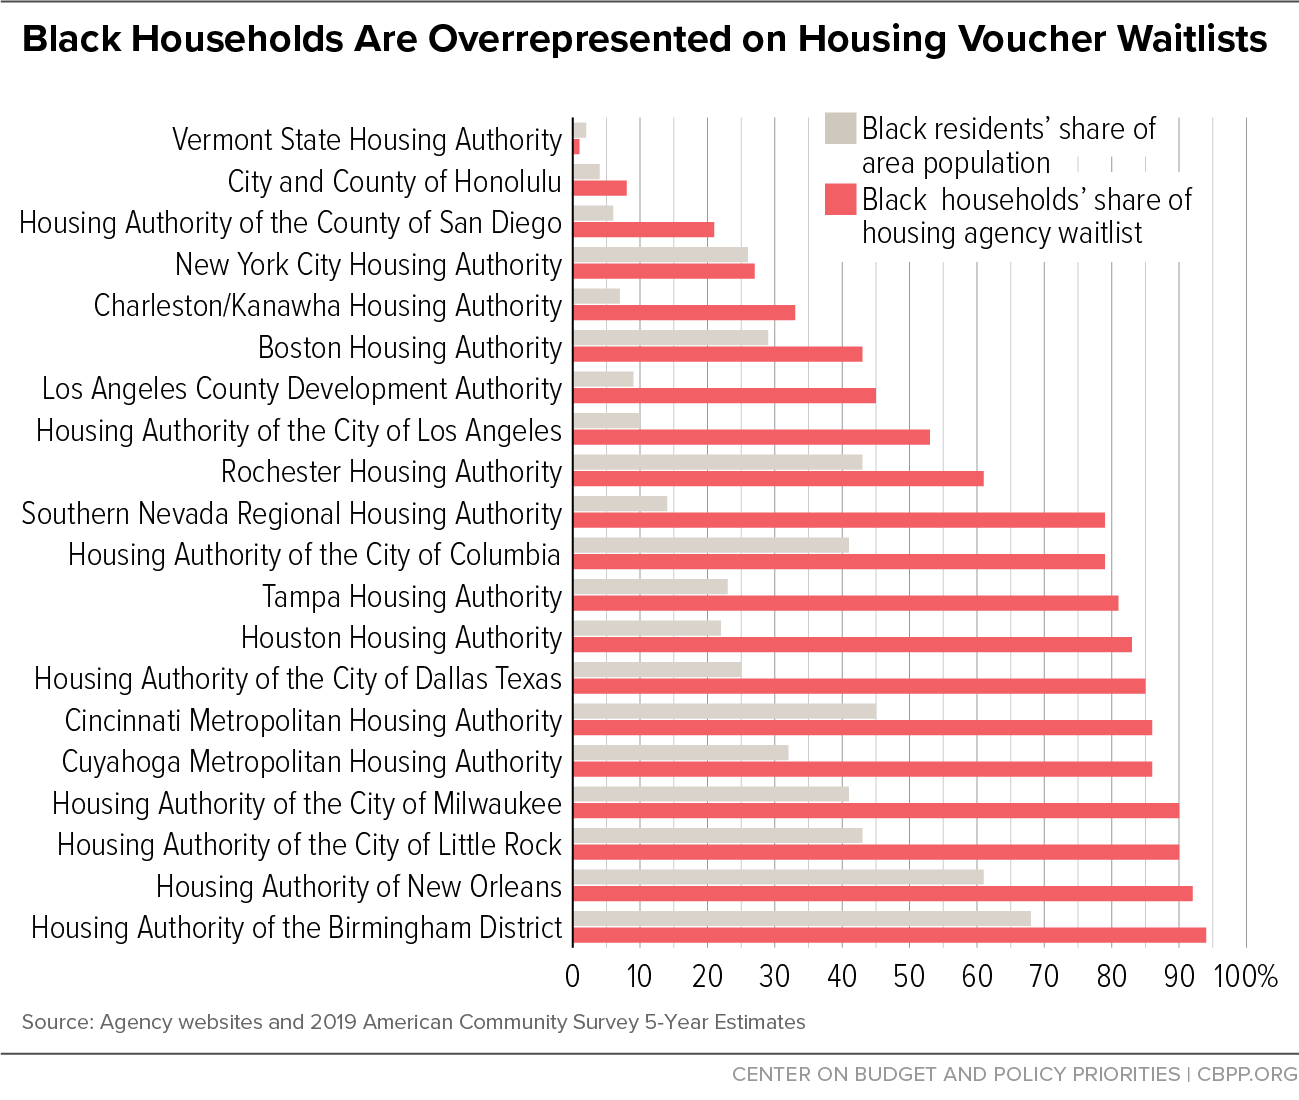 Black Households Are Overrepresented on Housing Voucher Waitlists